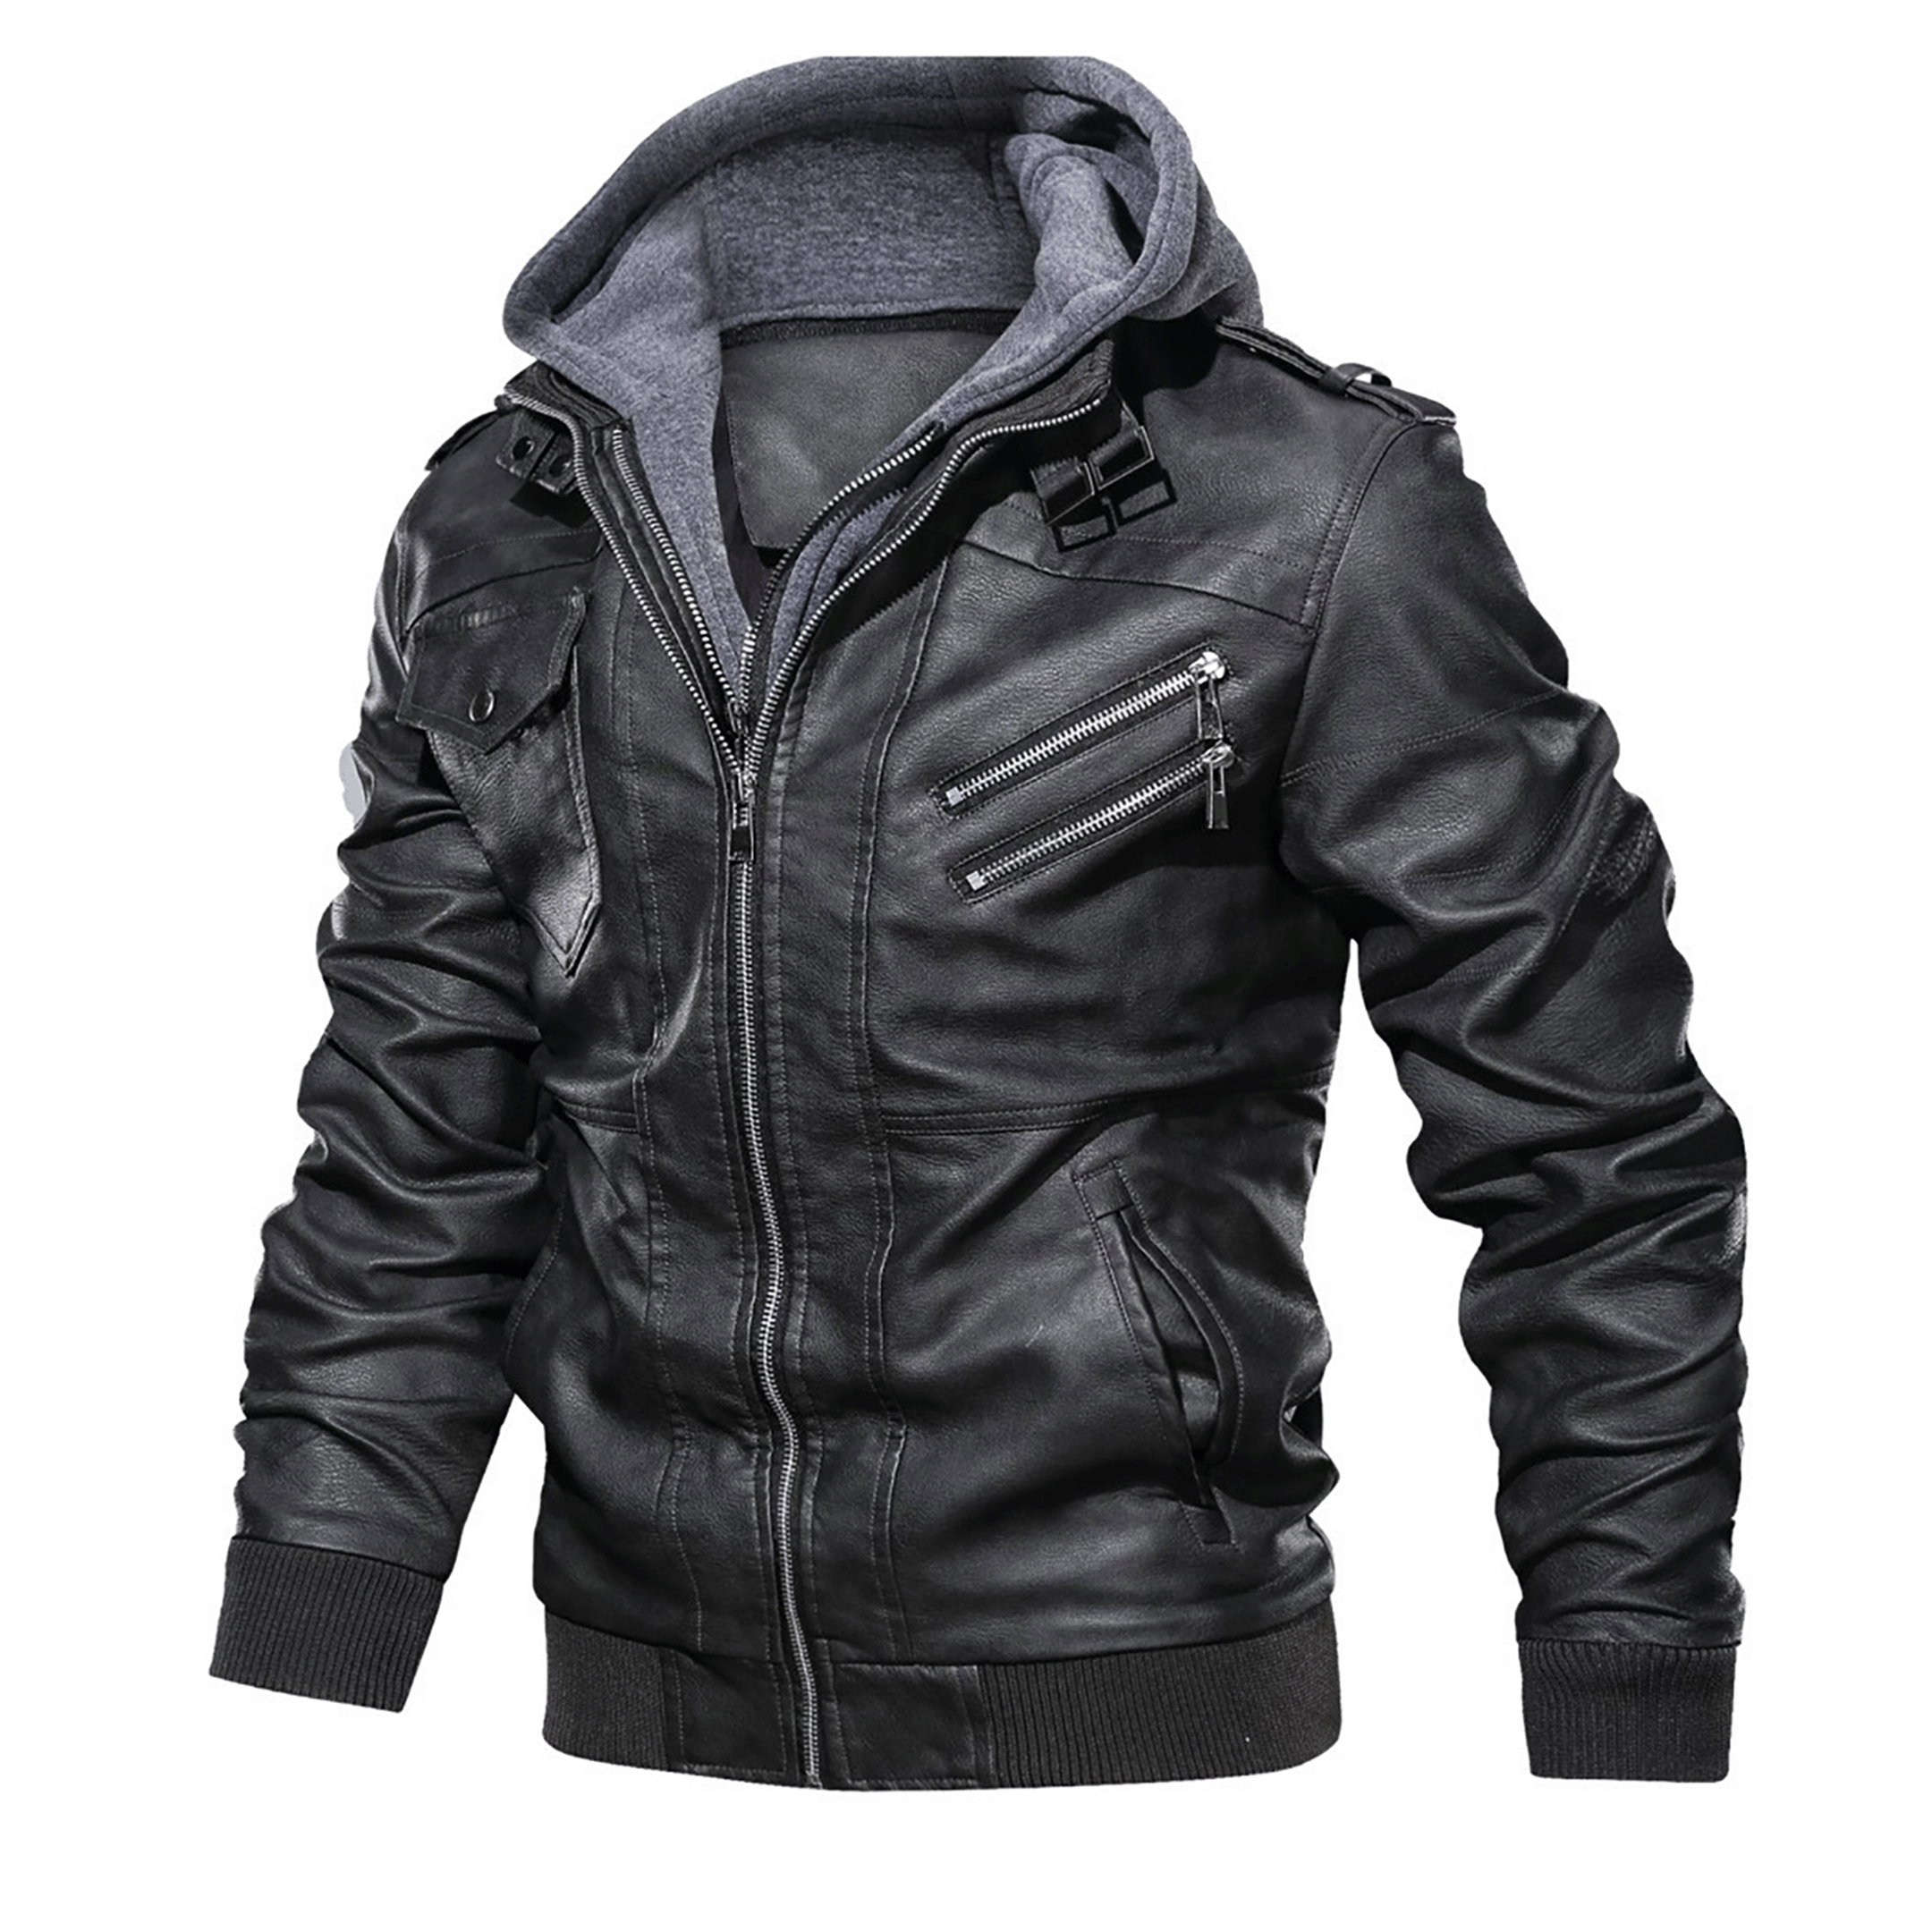 Top leather jackets and latest products 149